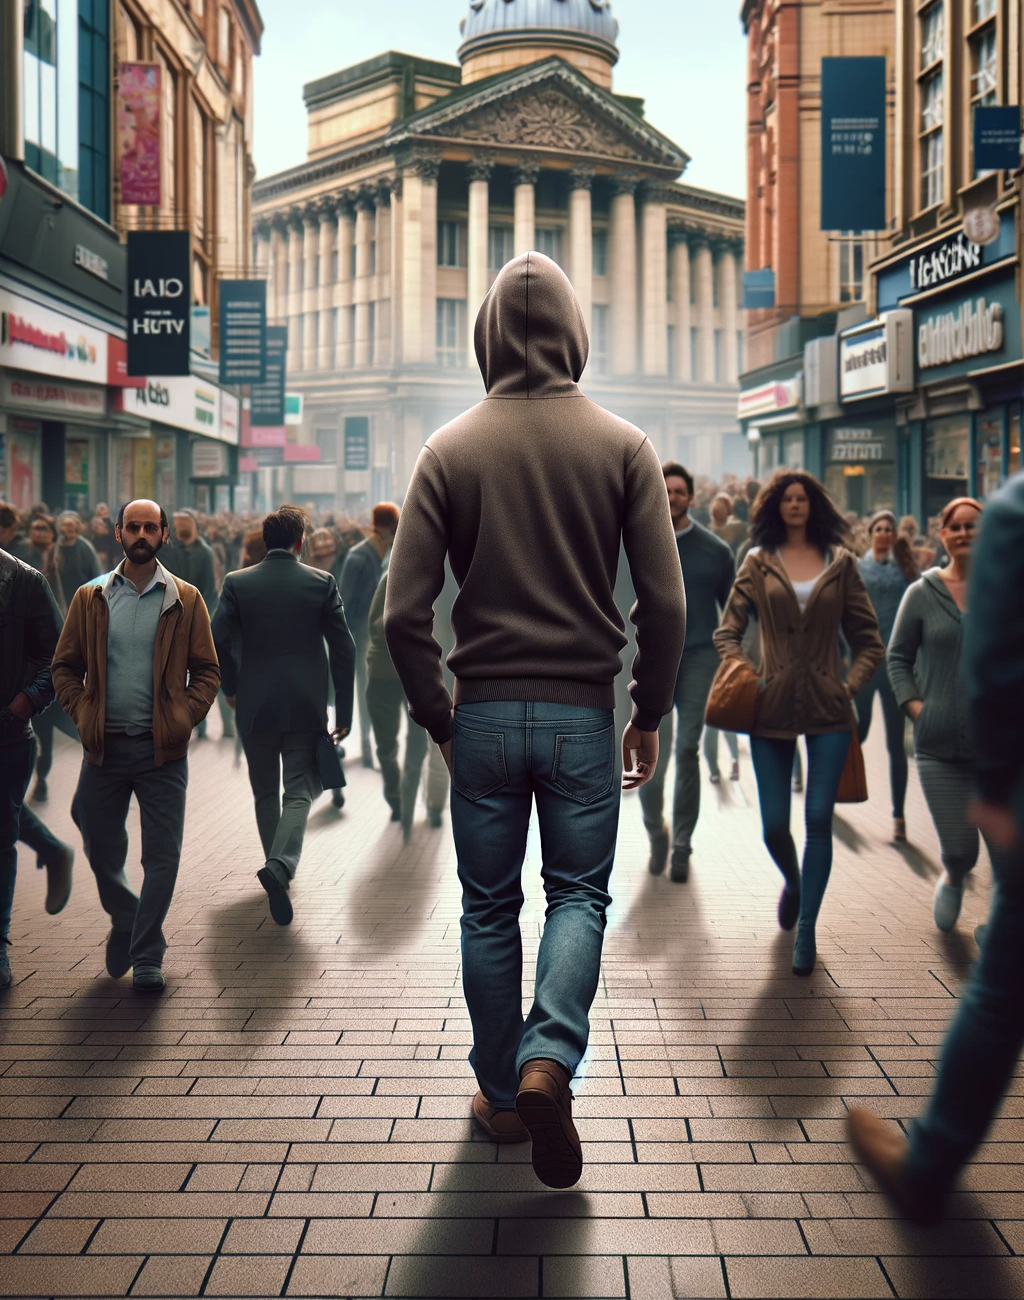 A private investigator walking through a crowded city centre as he conducts surveillance. Private Investigator.